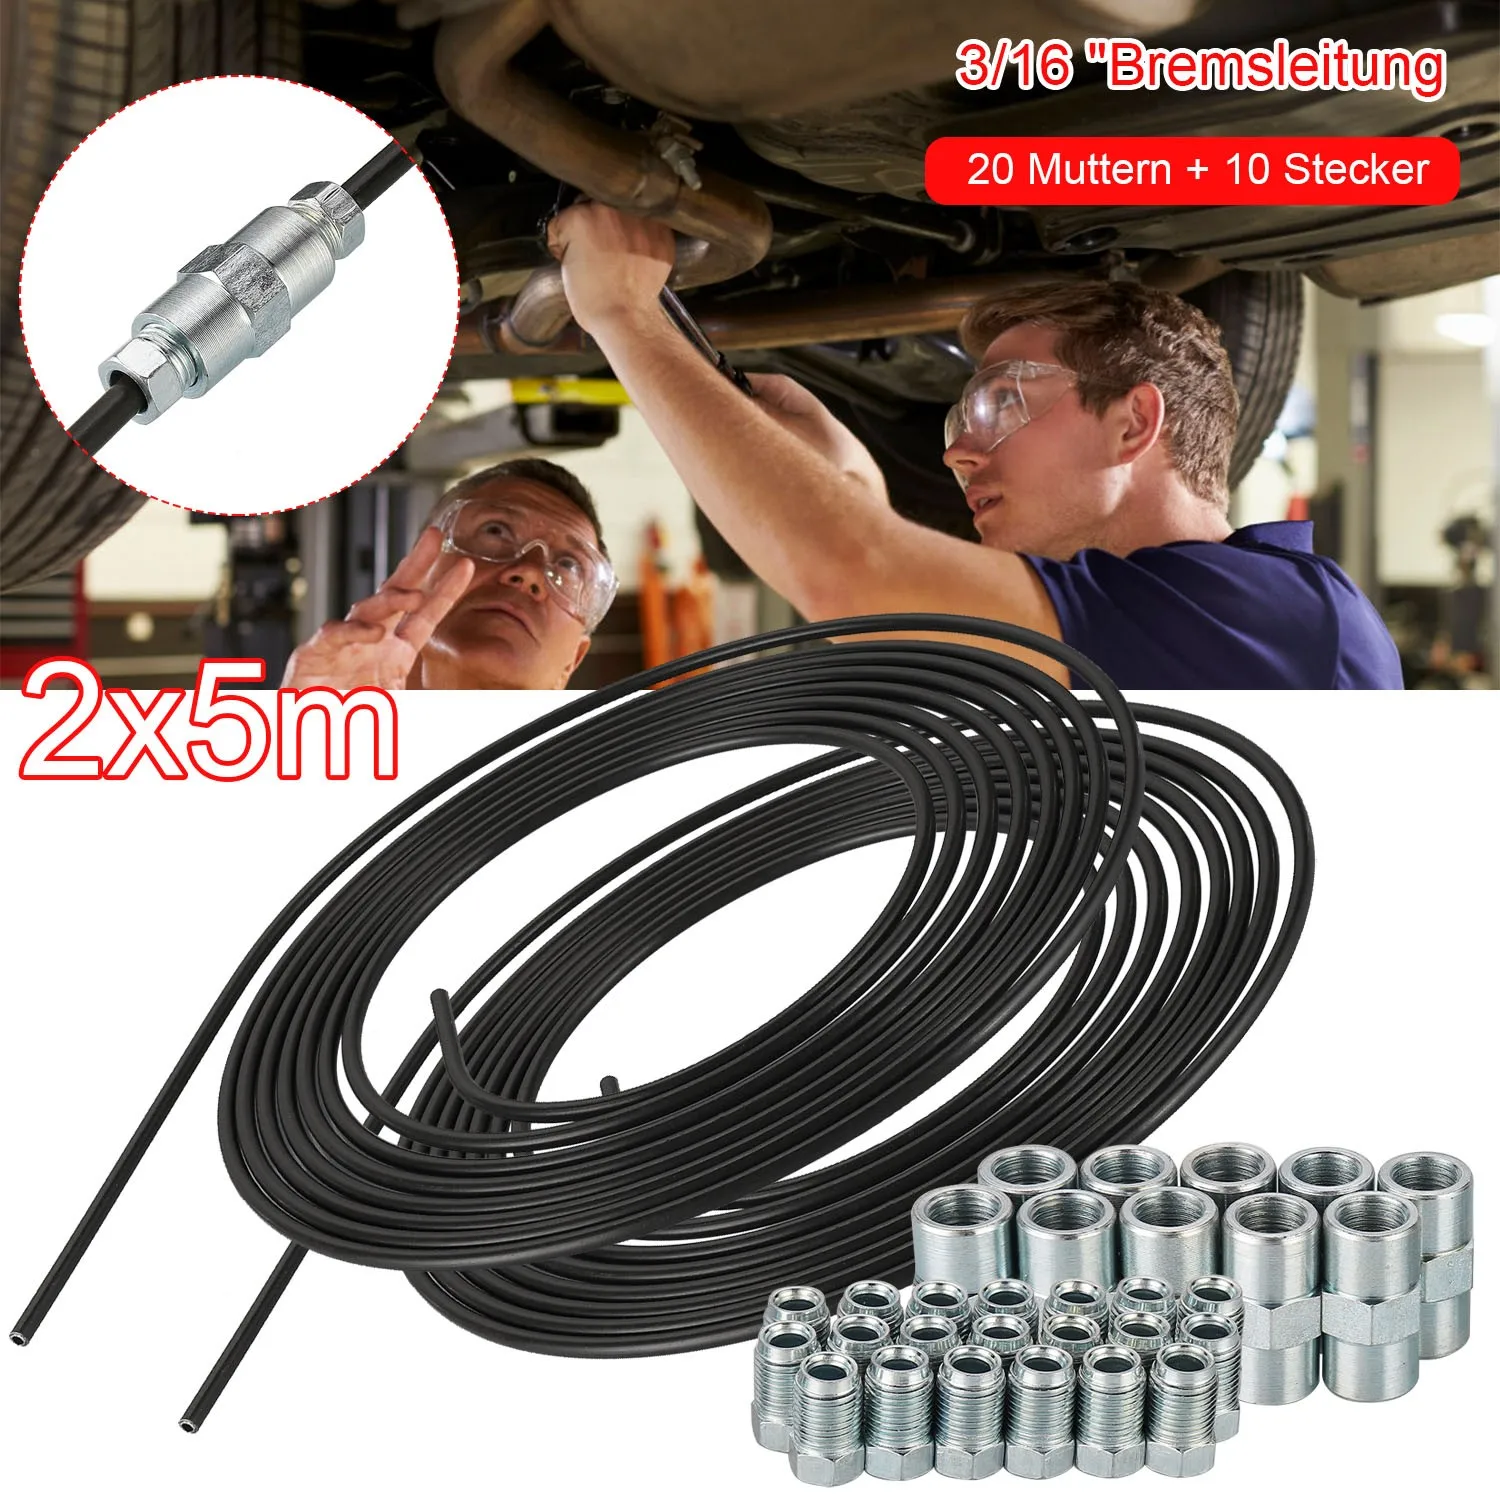 

2pcs Car Brake Lines 5m 3/16" 4.75mm Auto Roll Tube Coils Brake Pipes With 20 Nuts 10 Connectors Kit